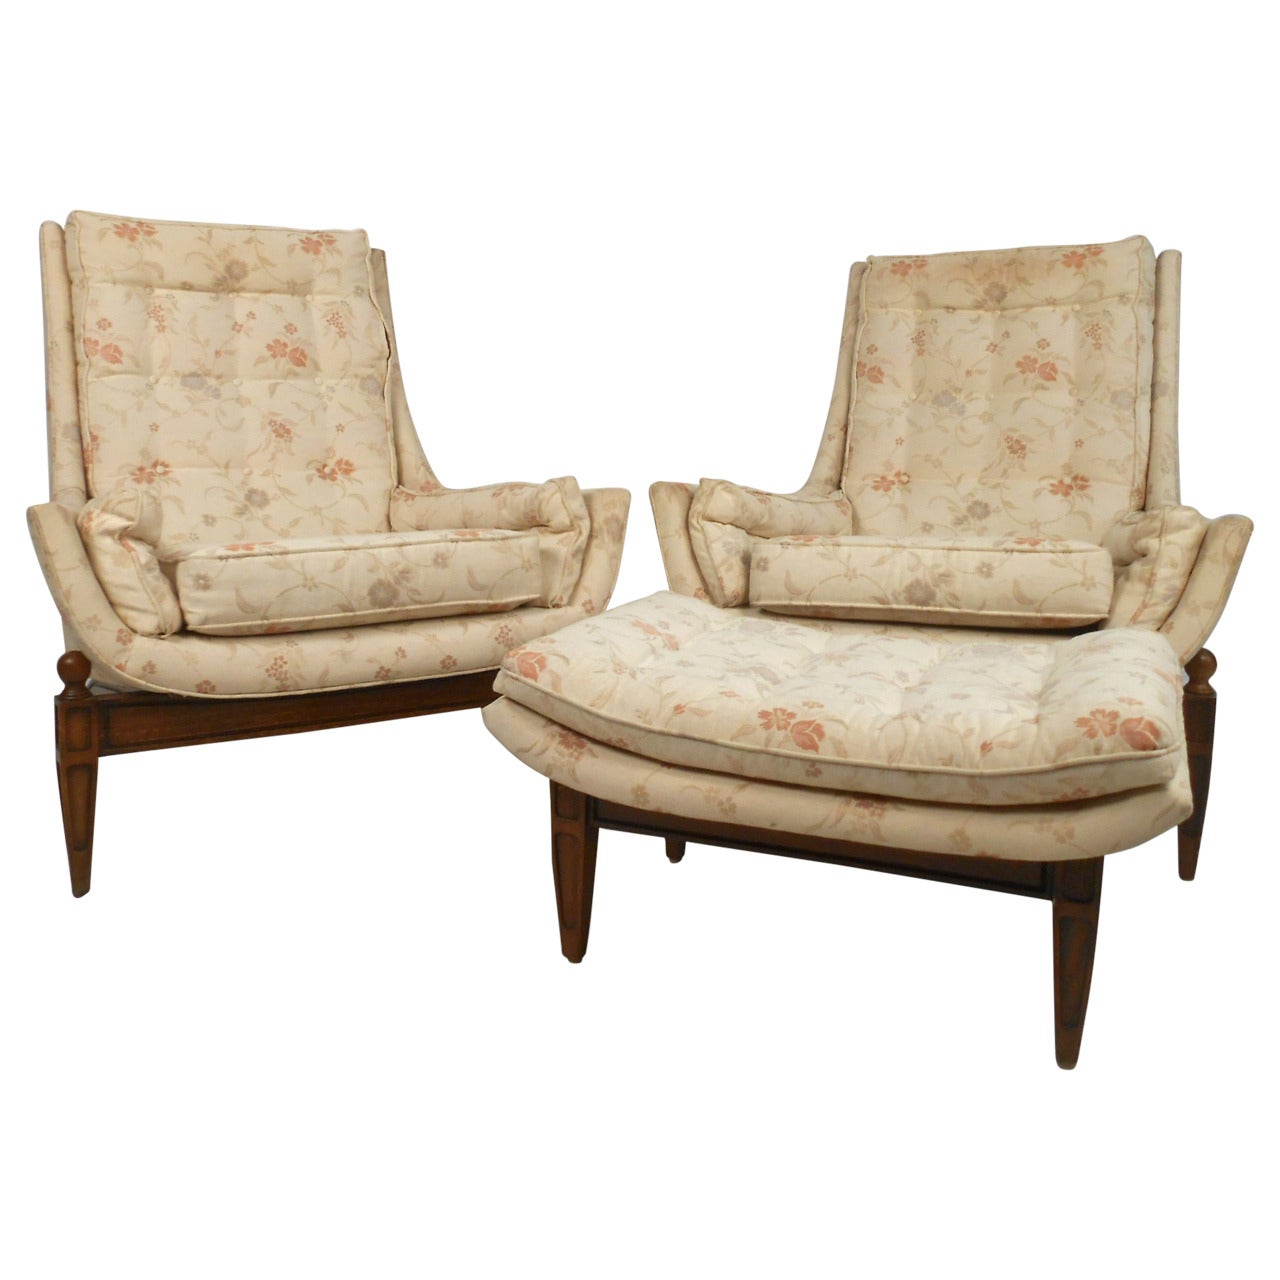 Midcentury His and Her's Lounge Chairs with Ottoman